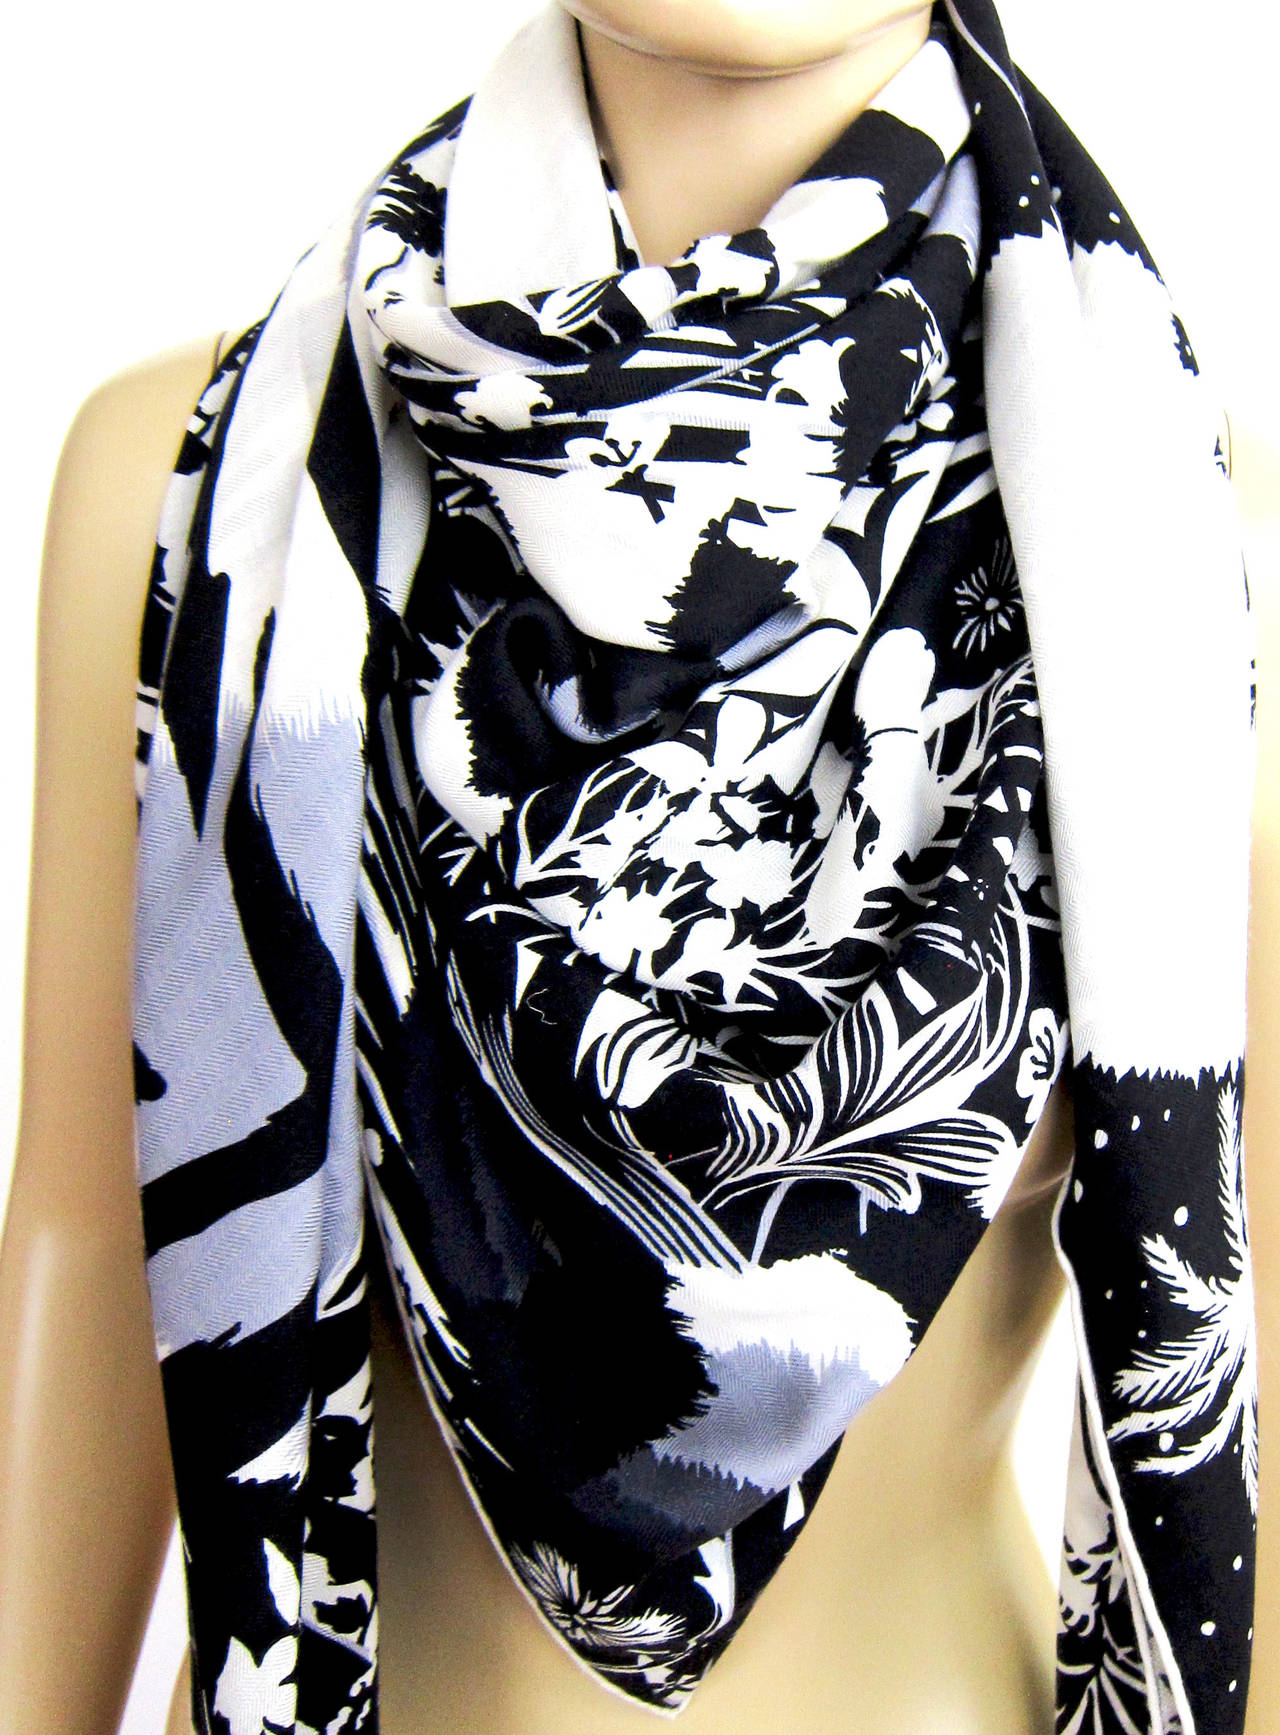 Hermes Tyger Tyger Black White Cashmere Silk Shawl GM 

Brand New in Box
Store fresh coming with Hermes box and ribbon
The hottest shawl of Fall/Winter 2015
55